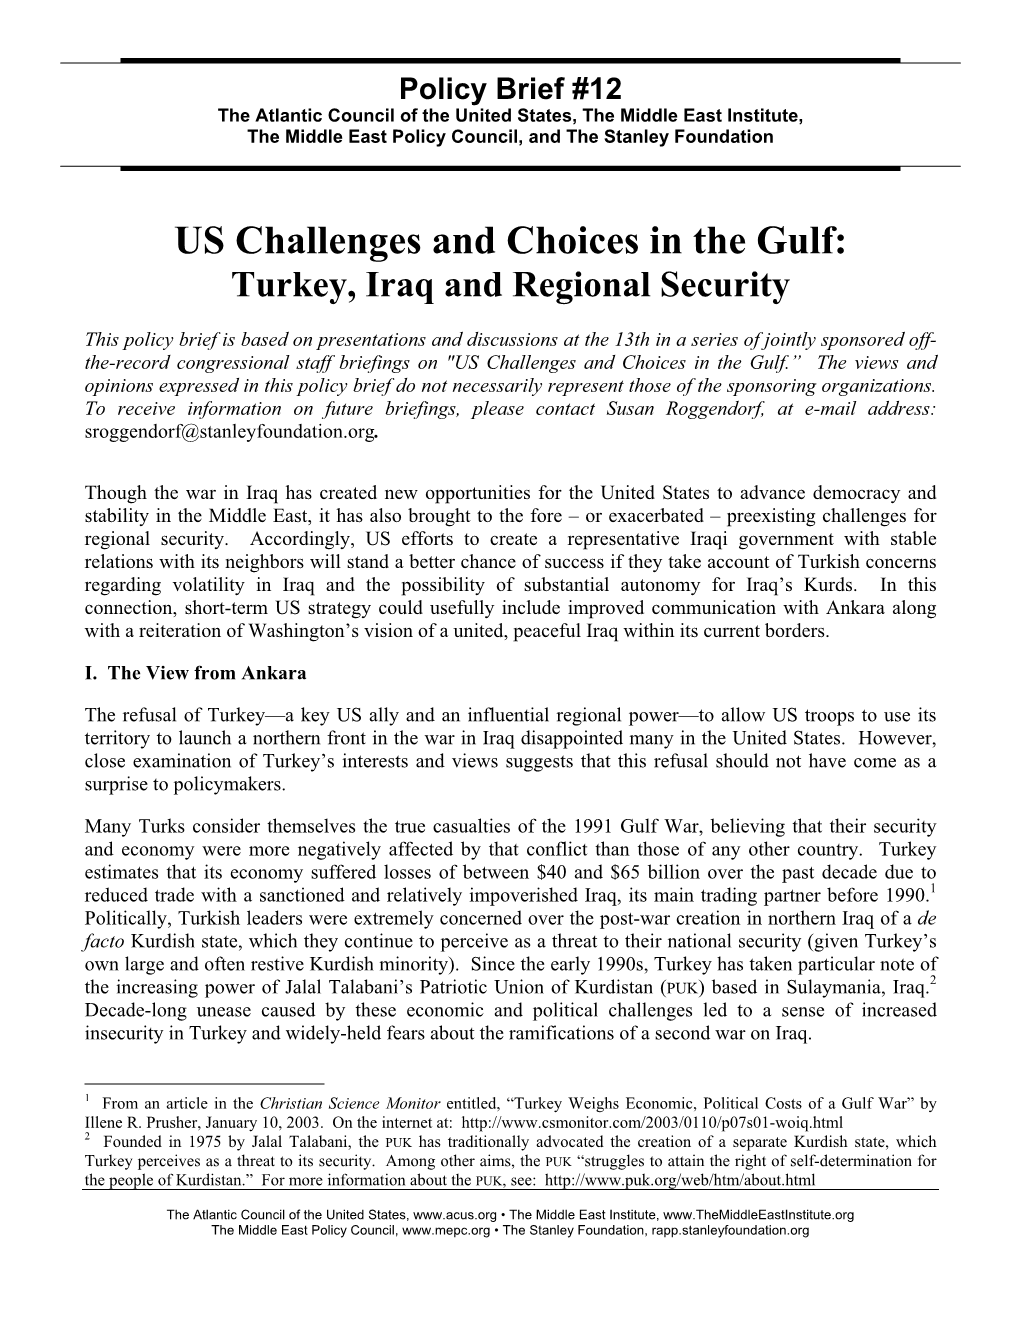 US Challenges and Choices in the Gulf: Turkey, Iraq and Regional Security